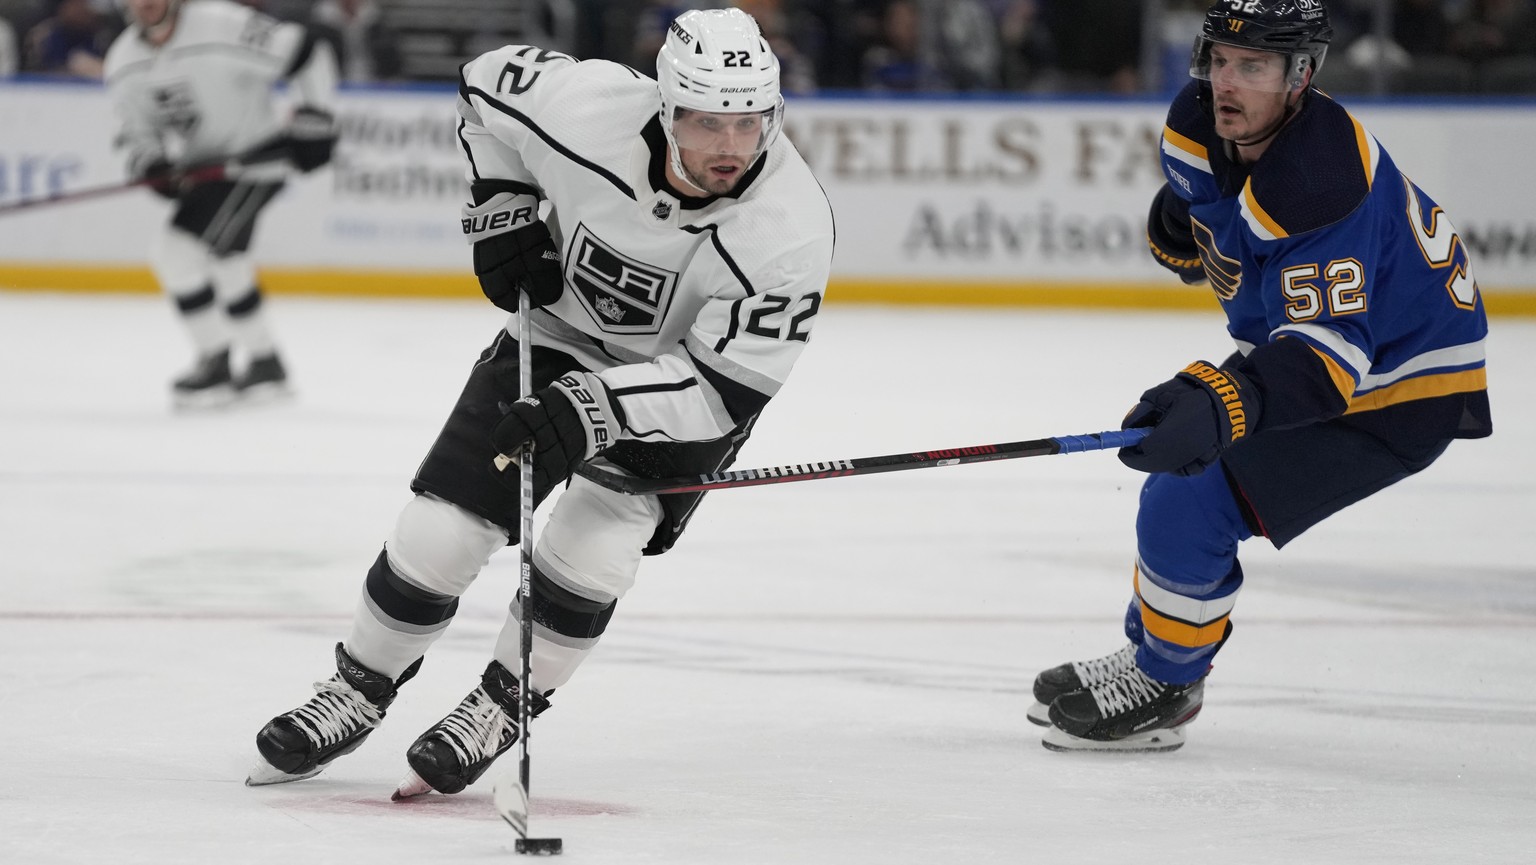 Los Angeles Kings' Kevin Fiala (22) handles the puck as St. Louis Blues' Noel Acciari (52) defends during the first period of an NHL hockey game Monday, Oct. 31, 2022, in St. Louis. (AP Photo/Jeff Rob ...